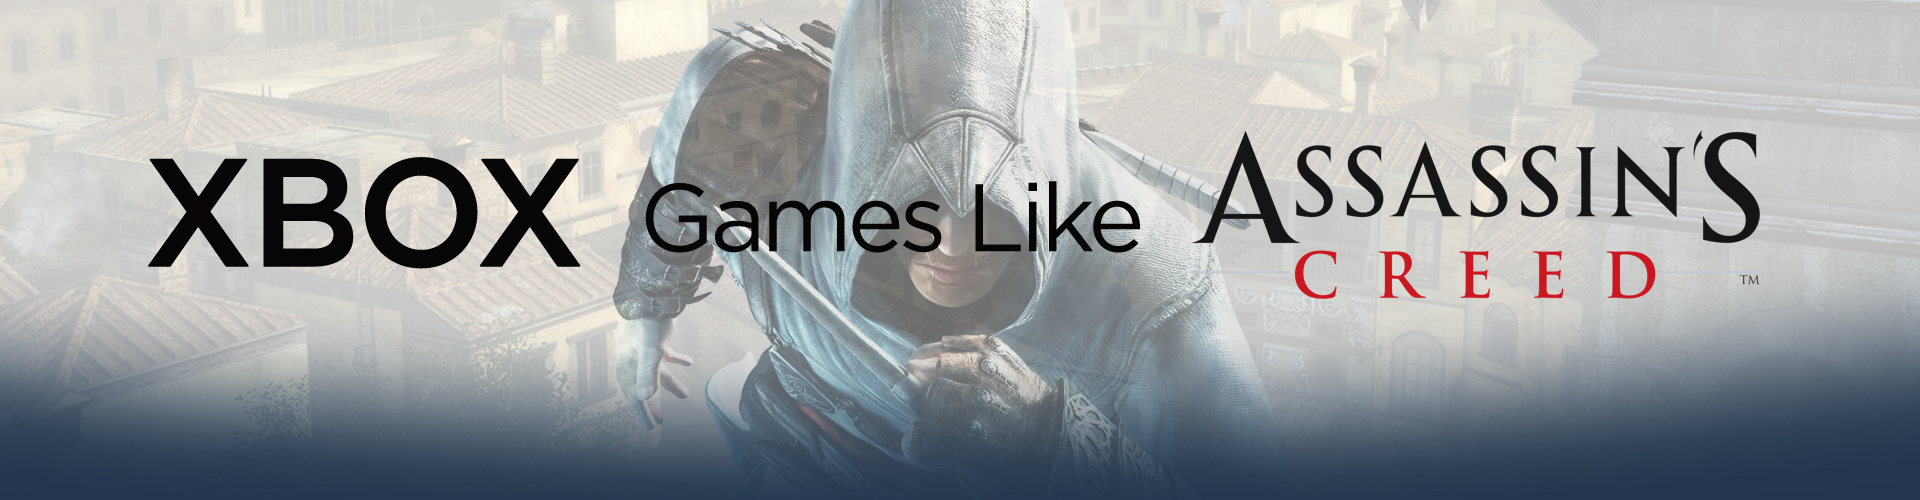 Xbox Games like Assassin's Creed